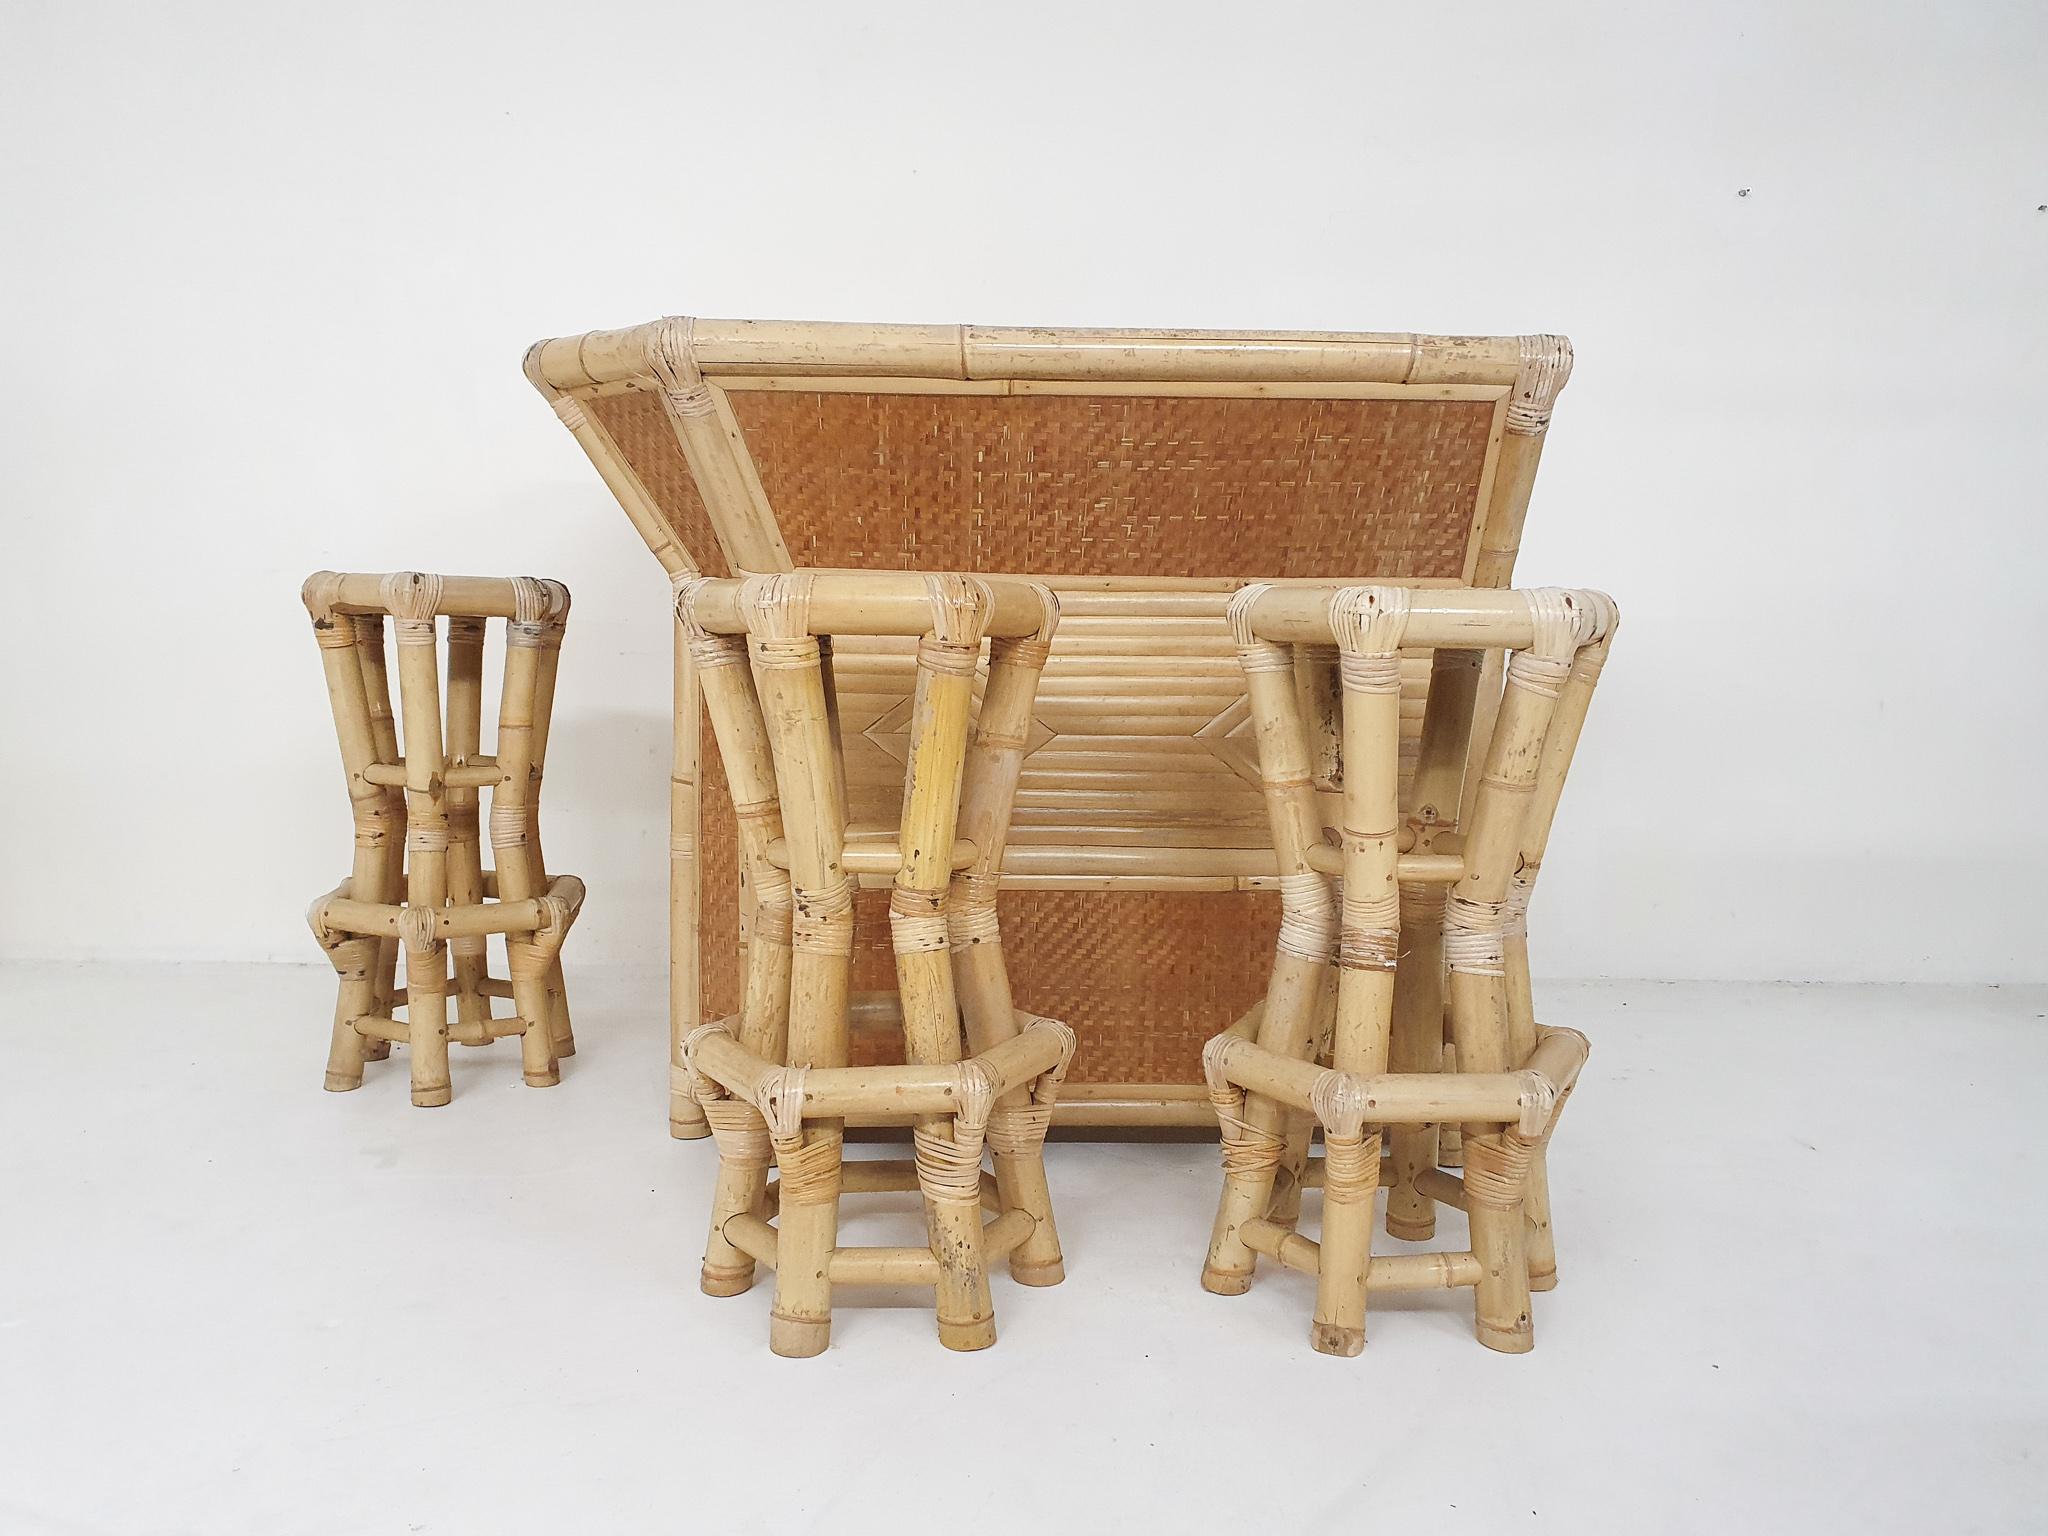 Bamboo and rattan bar with 3 bar stools.
The set has been used outside, so has gained some mold stains.

Dimensions bar:
130 x 110 x 112 cm (LxWxH)

Dimensions bar stools:
43 x 43 x 80 cm (LxWxH)
